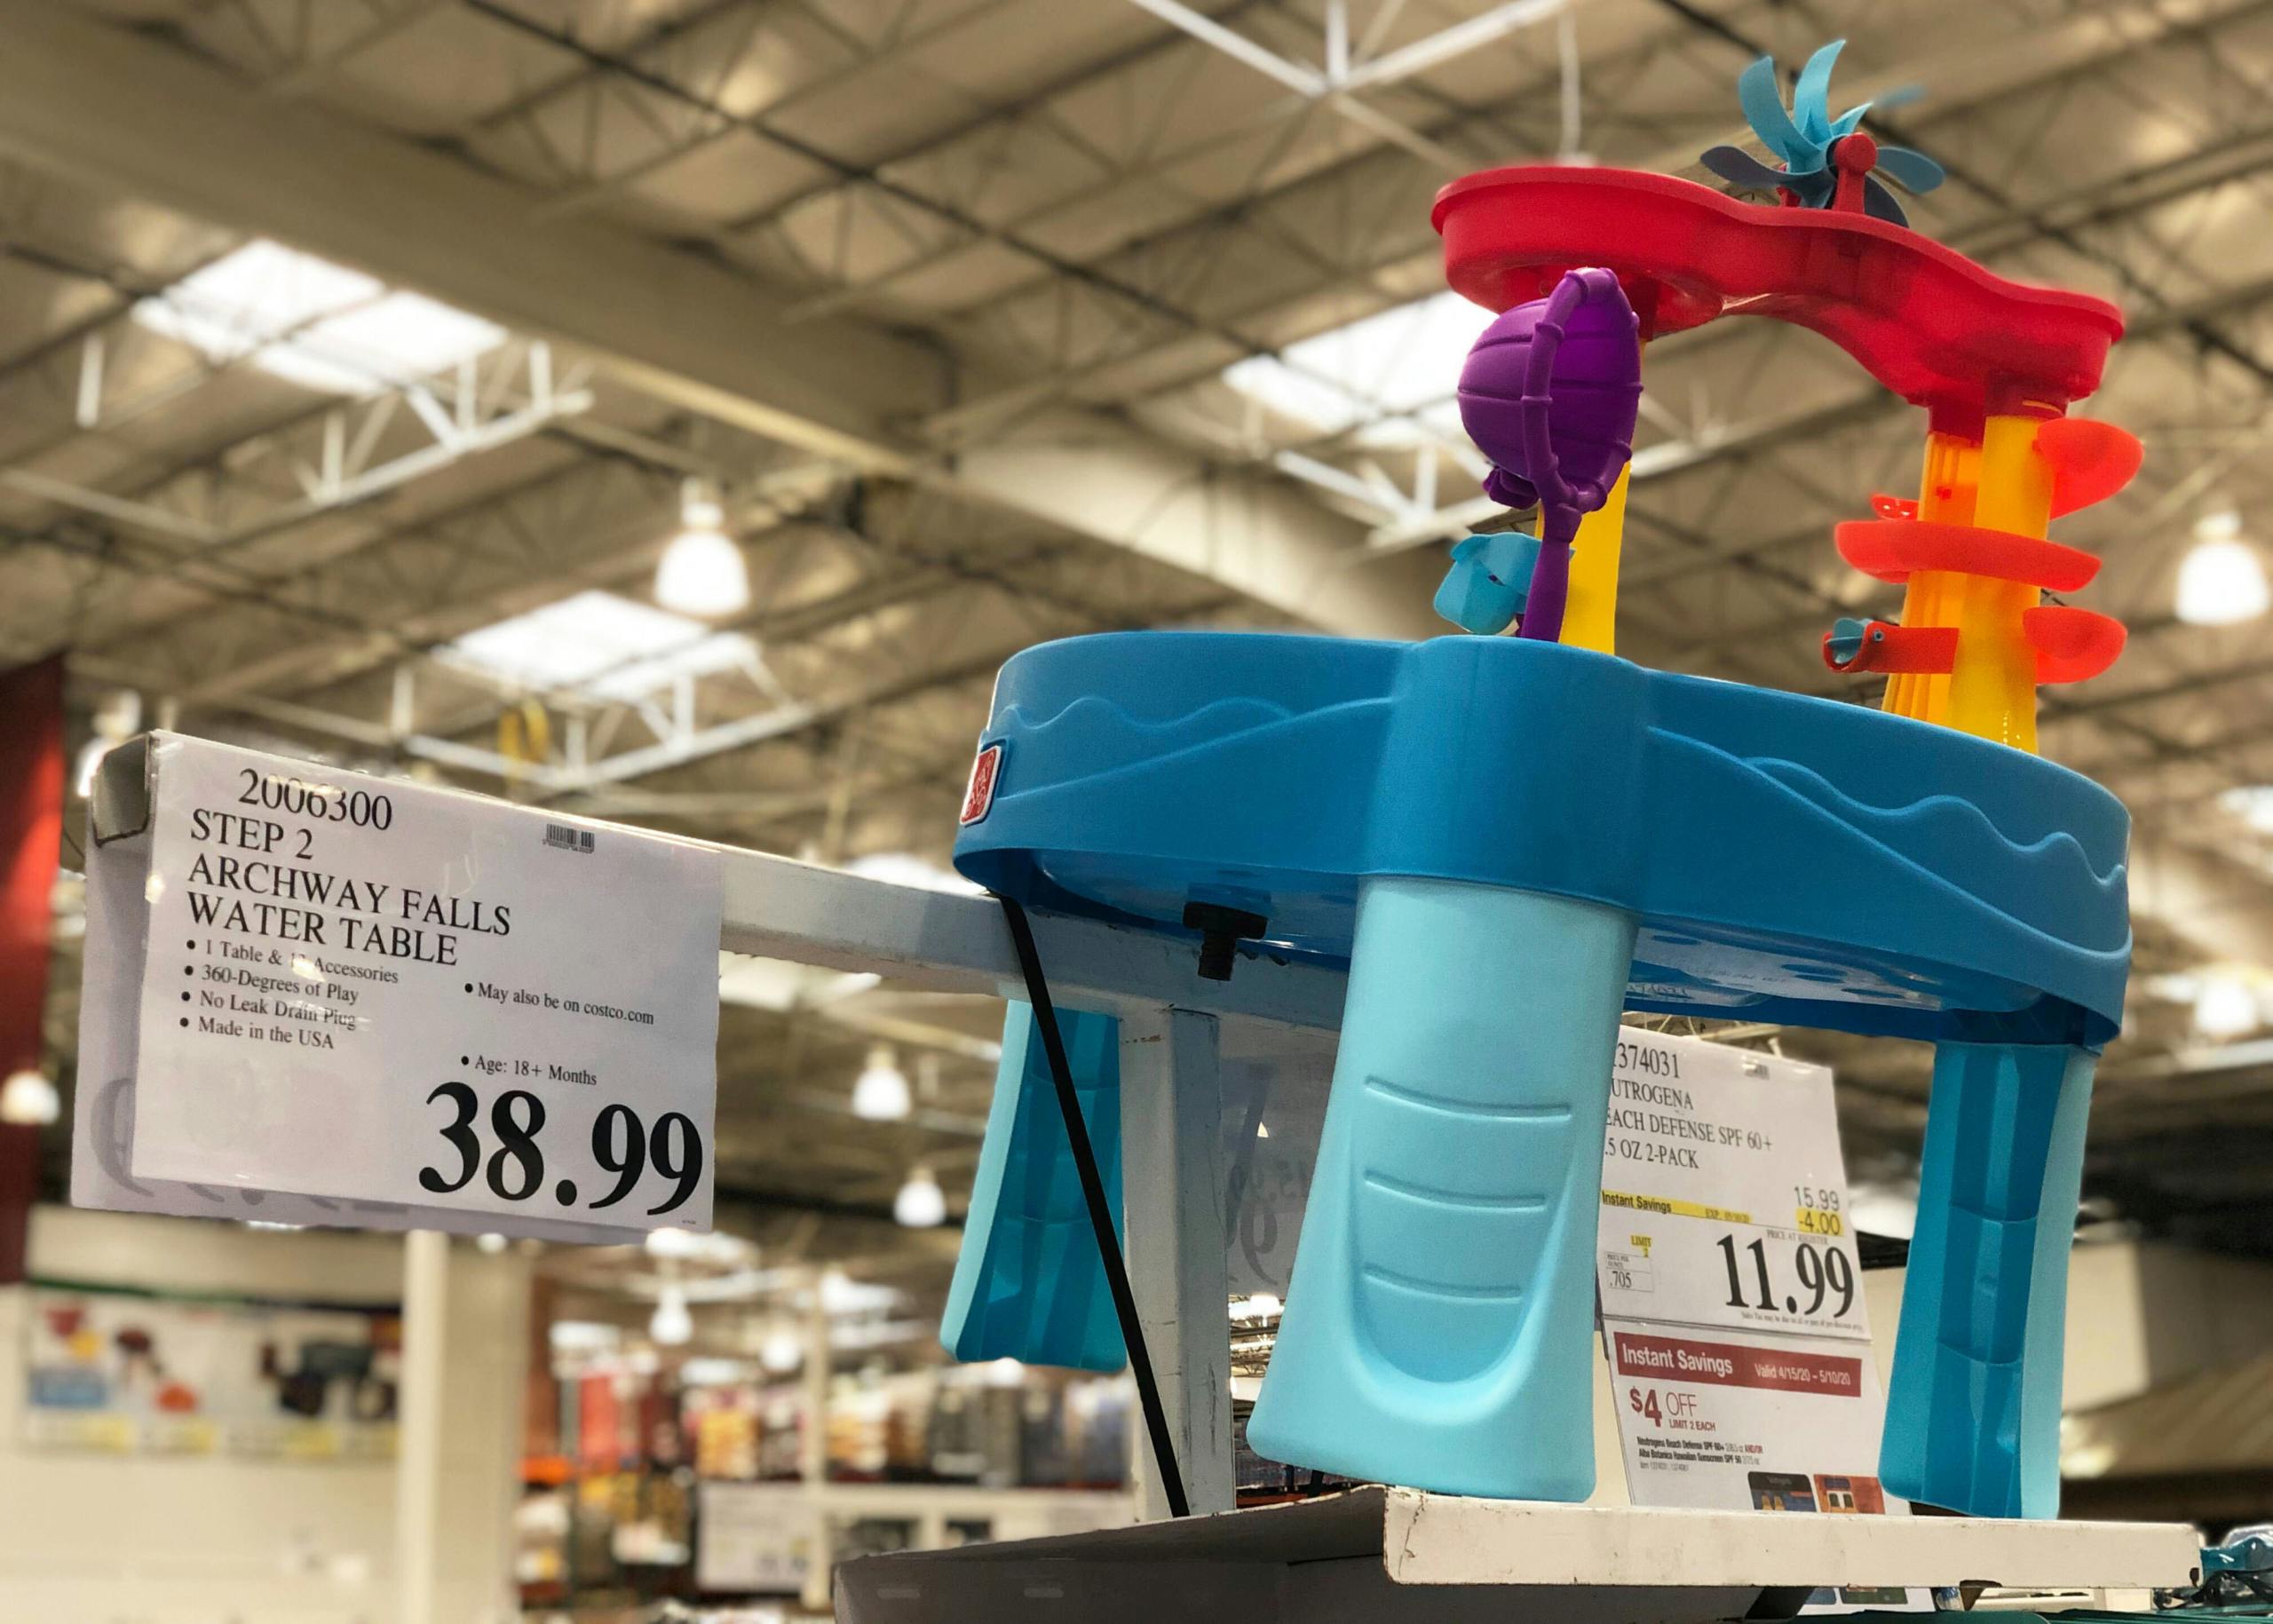 costco water play table